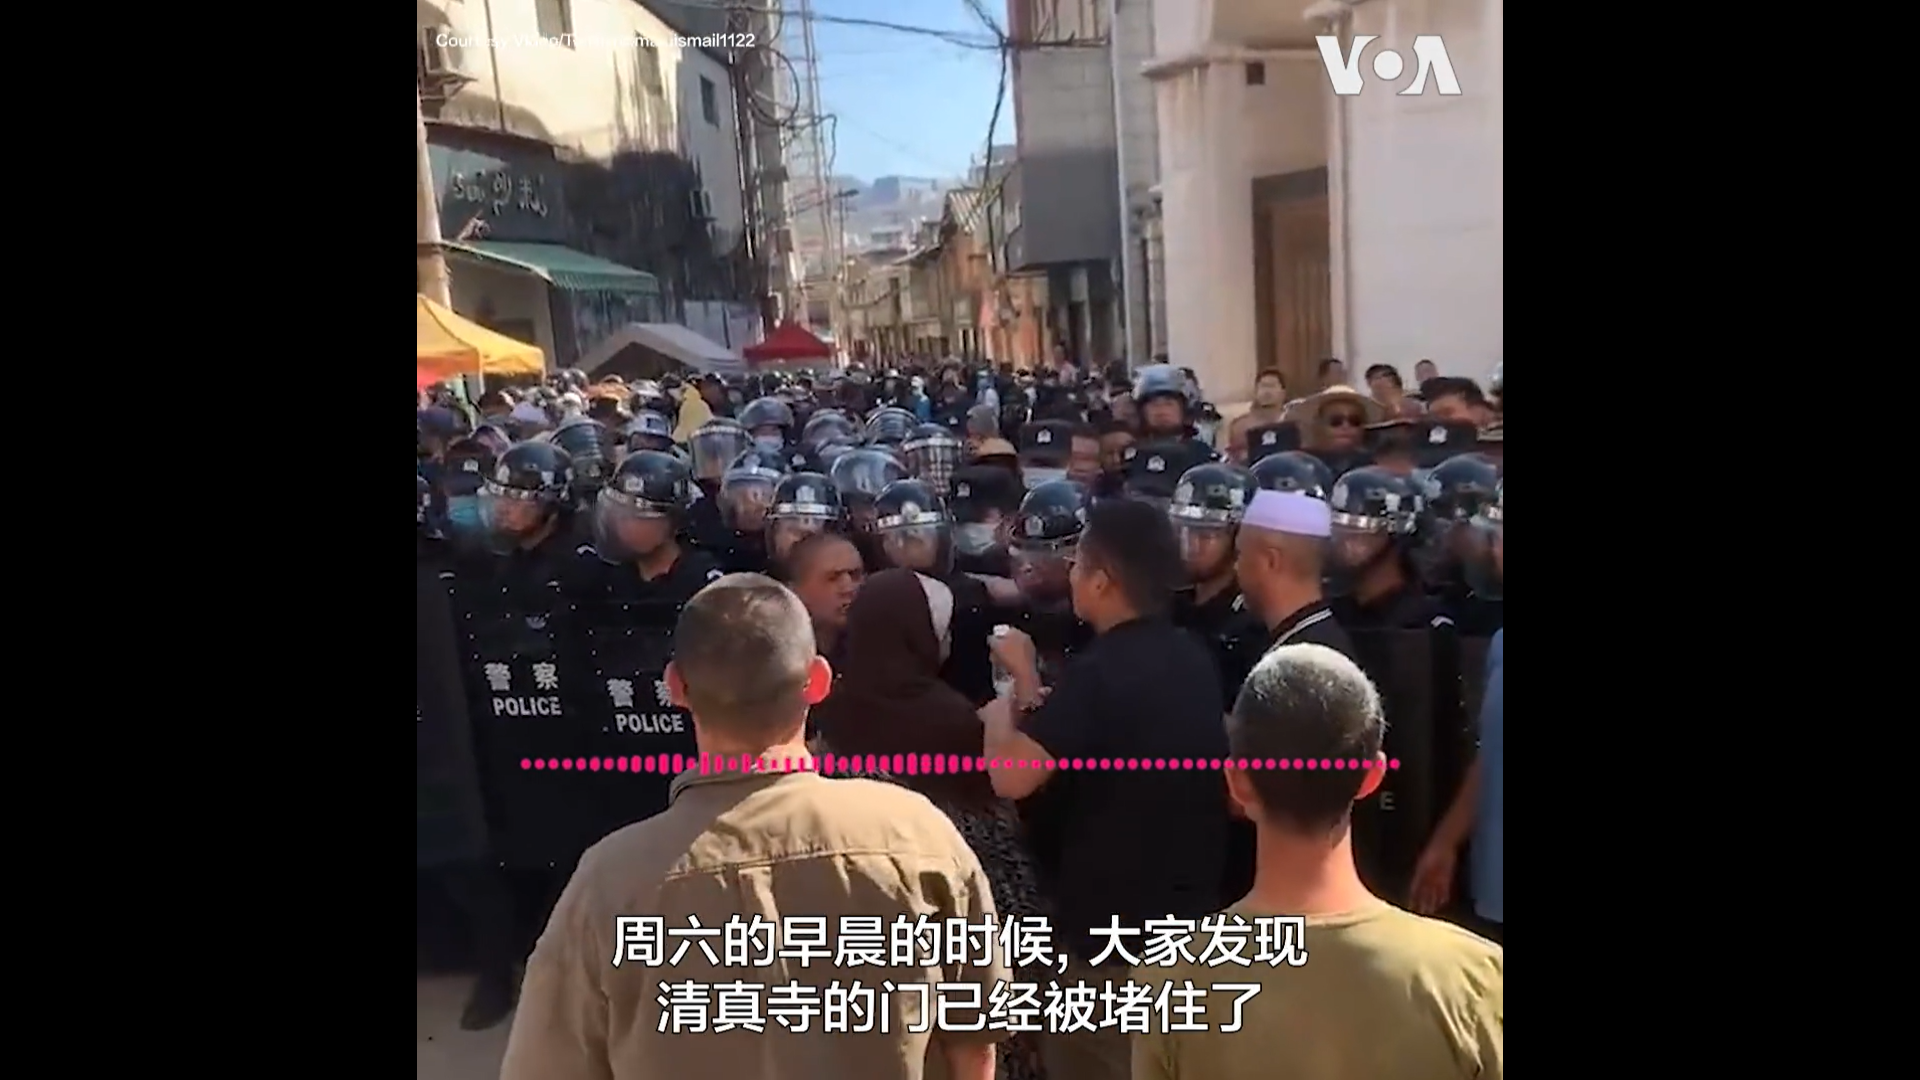 Ethnic minority Muslims clashed with large number of police in southwest China after they were blocked from worshipping in a mosque that they said authorities are planning to demolish